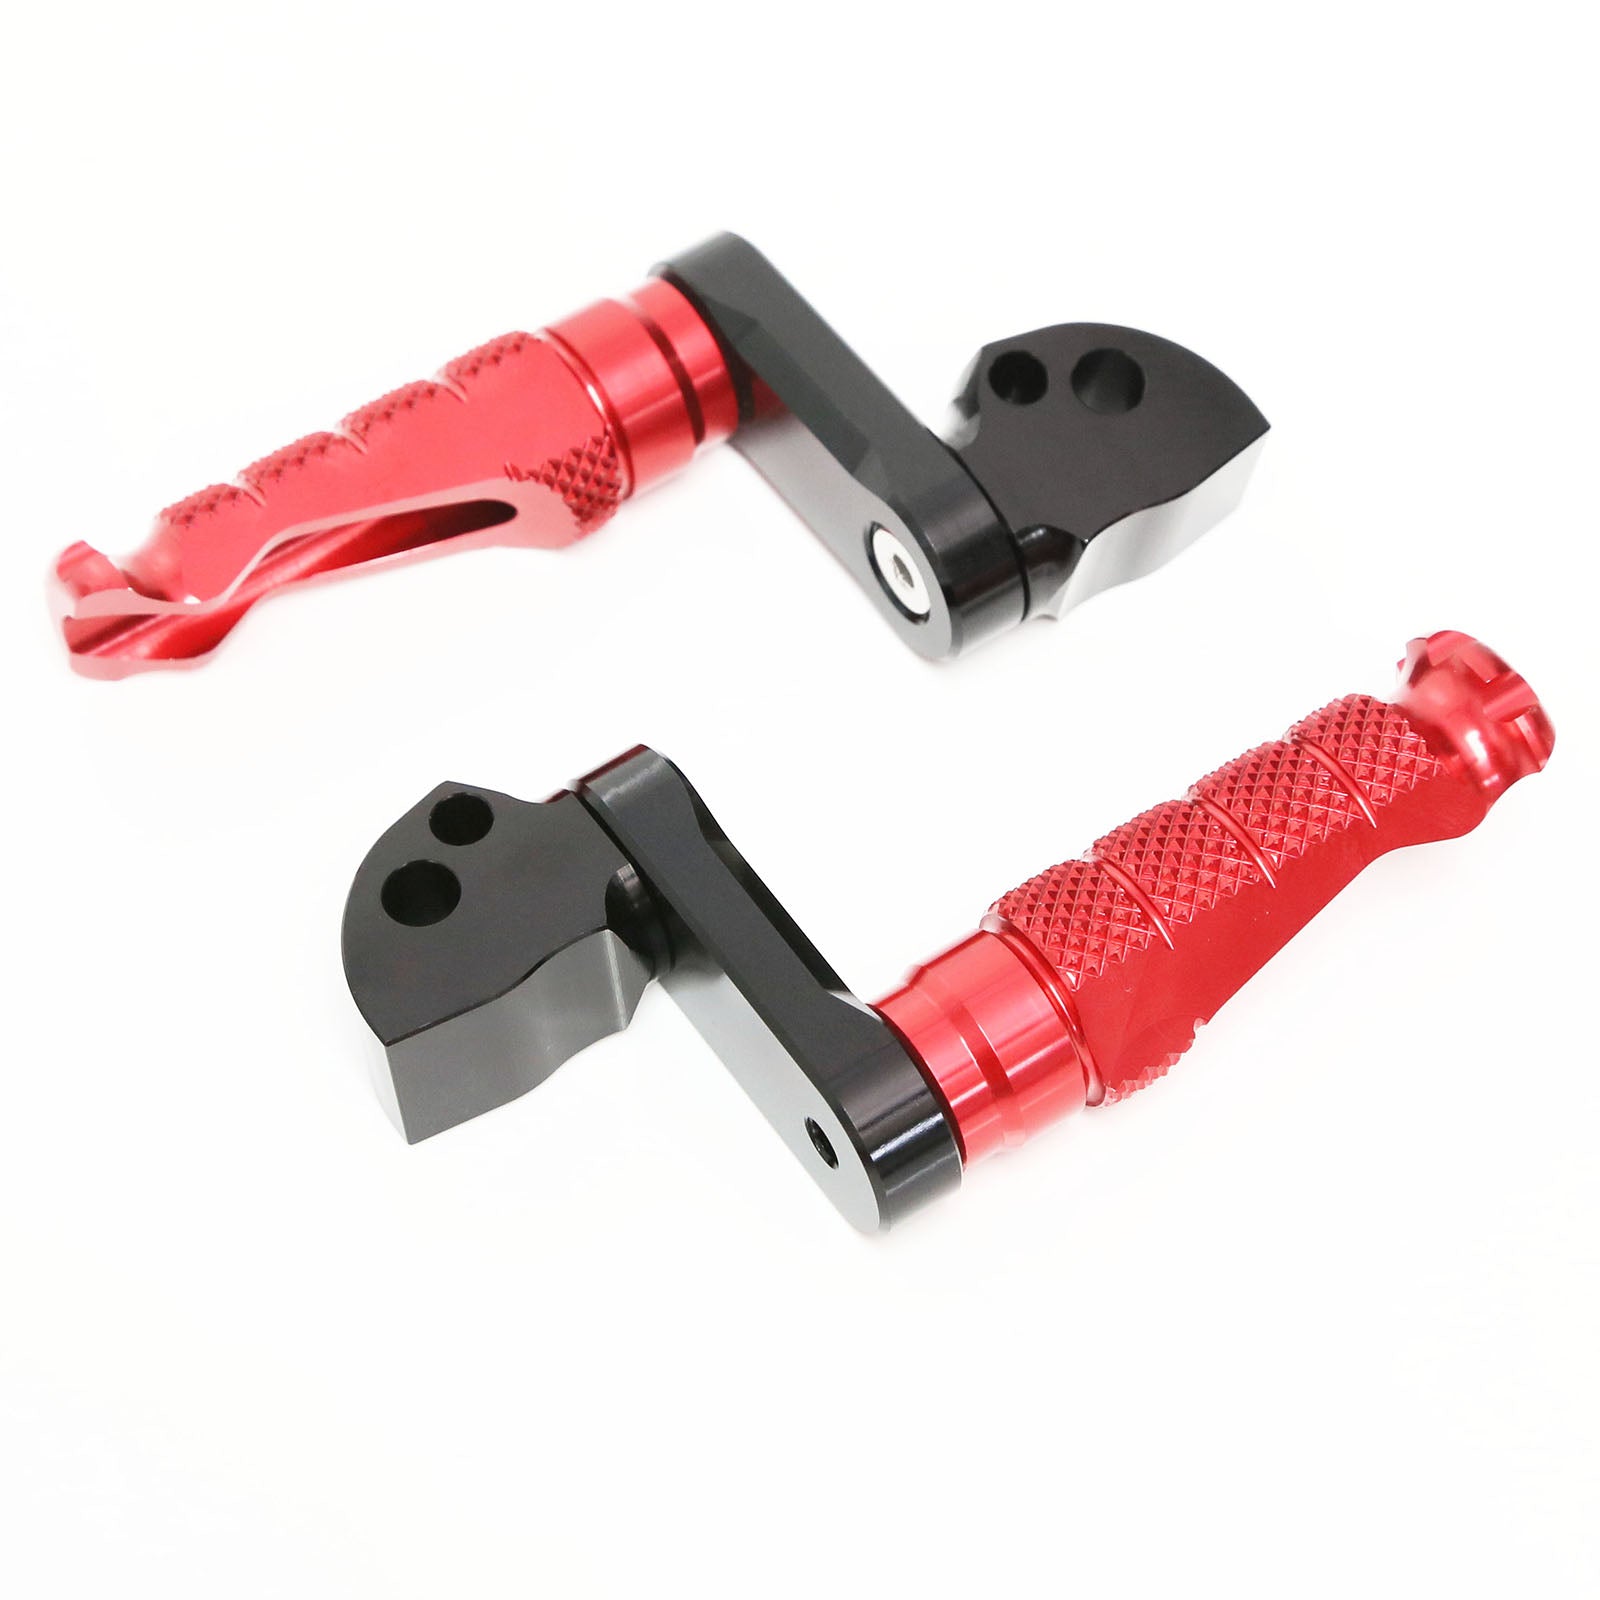 Fits Yamaha YZF R6 R3 R1 R25 40mm Extension Rear R-FIGHT Red Foot Pegs